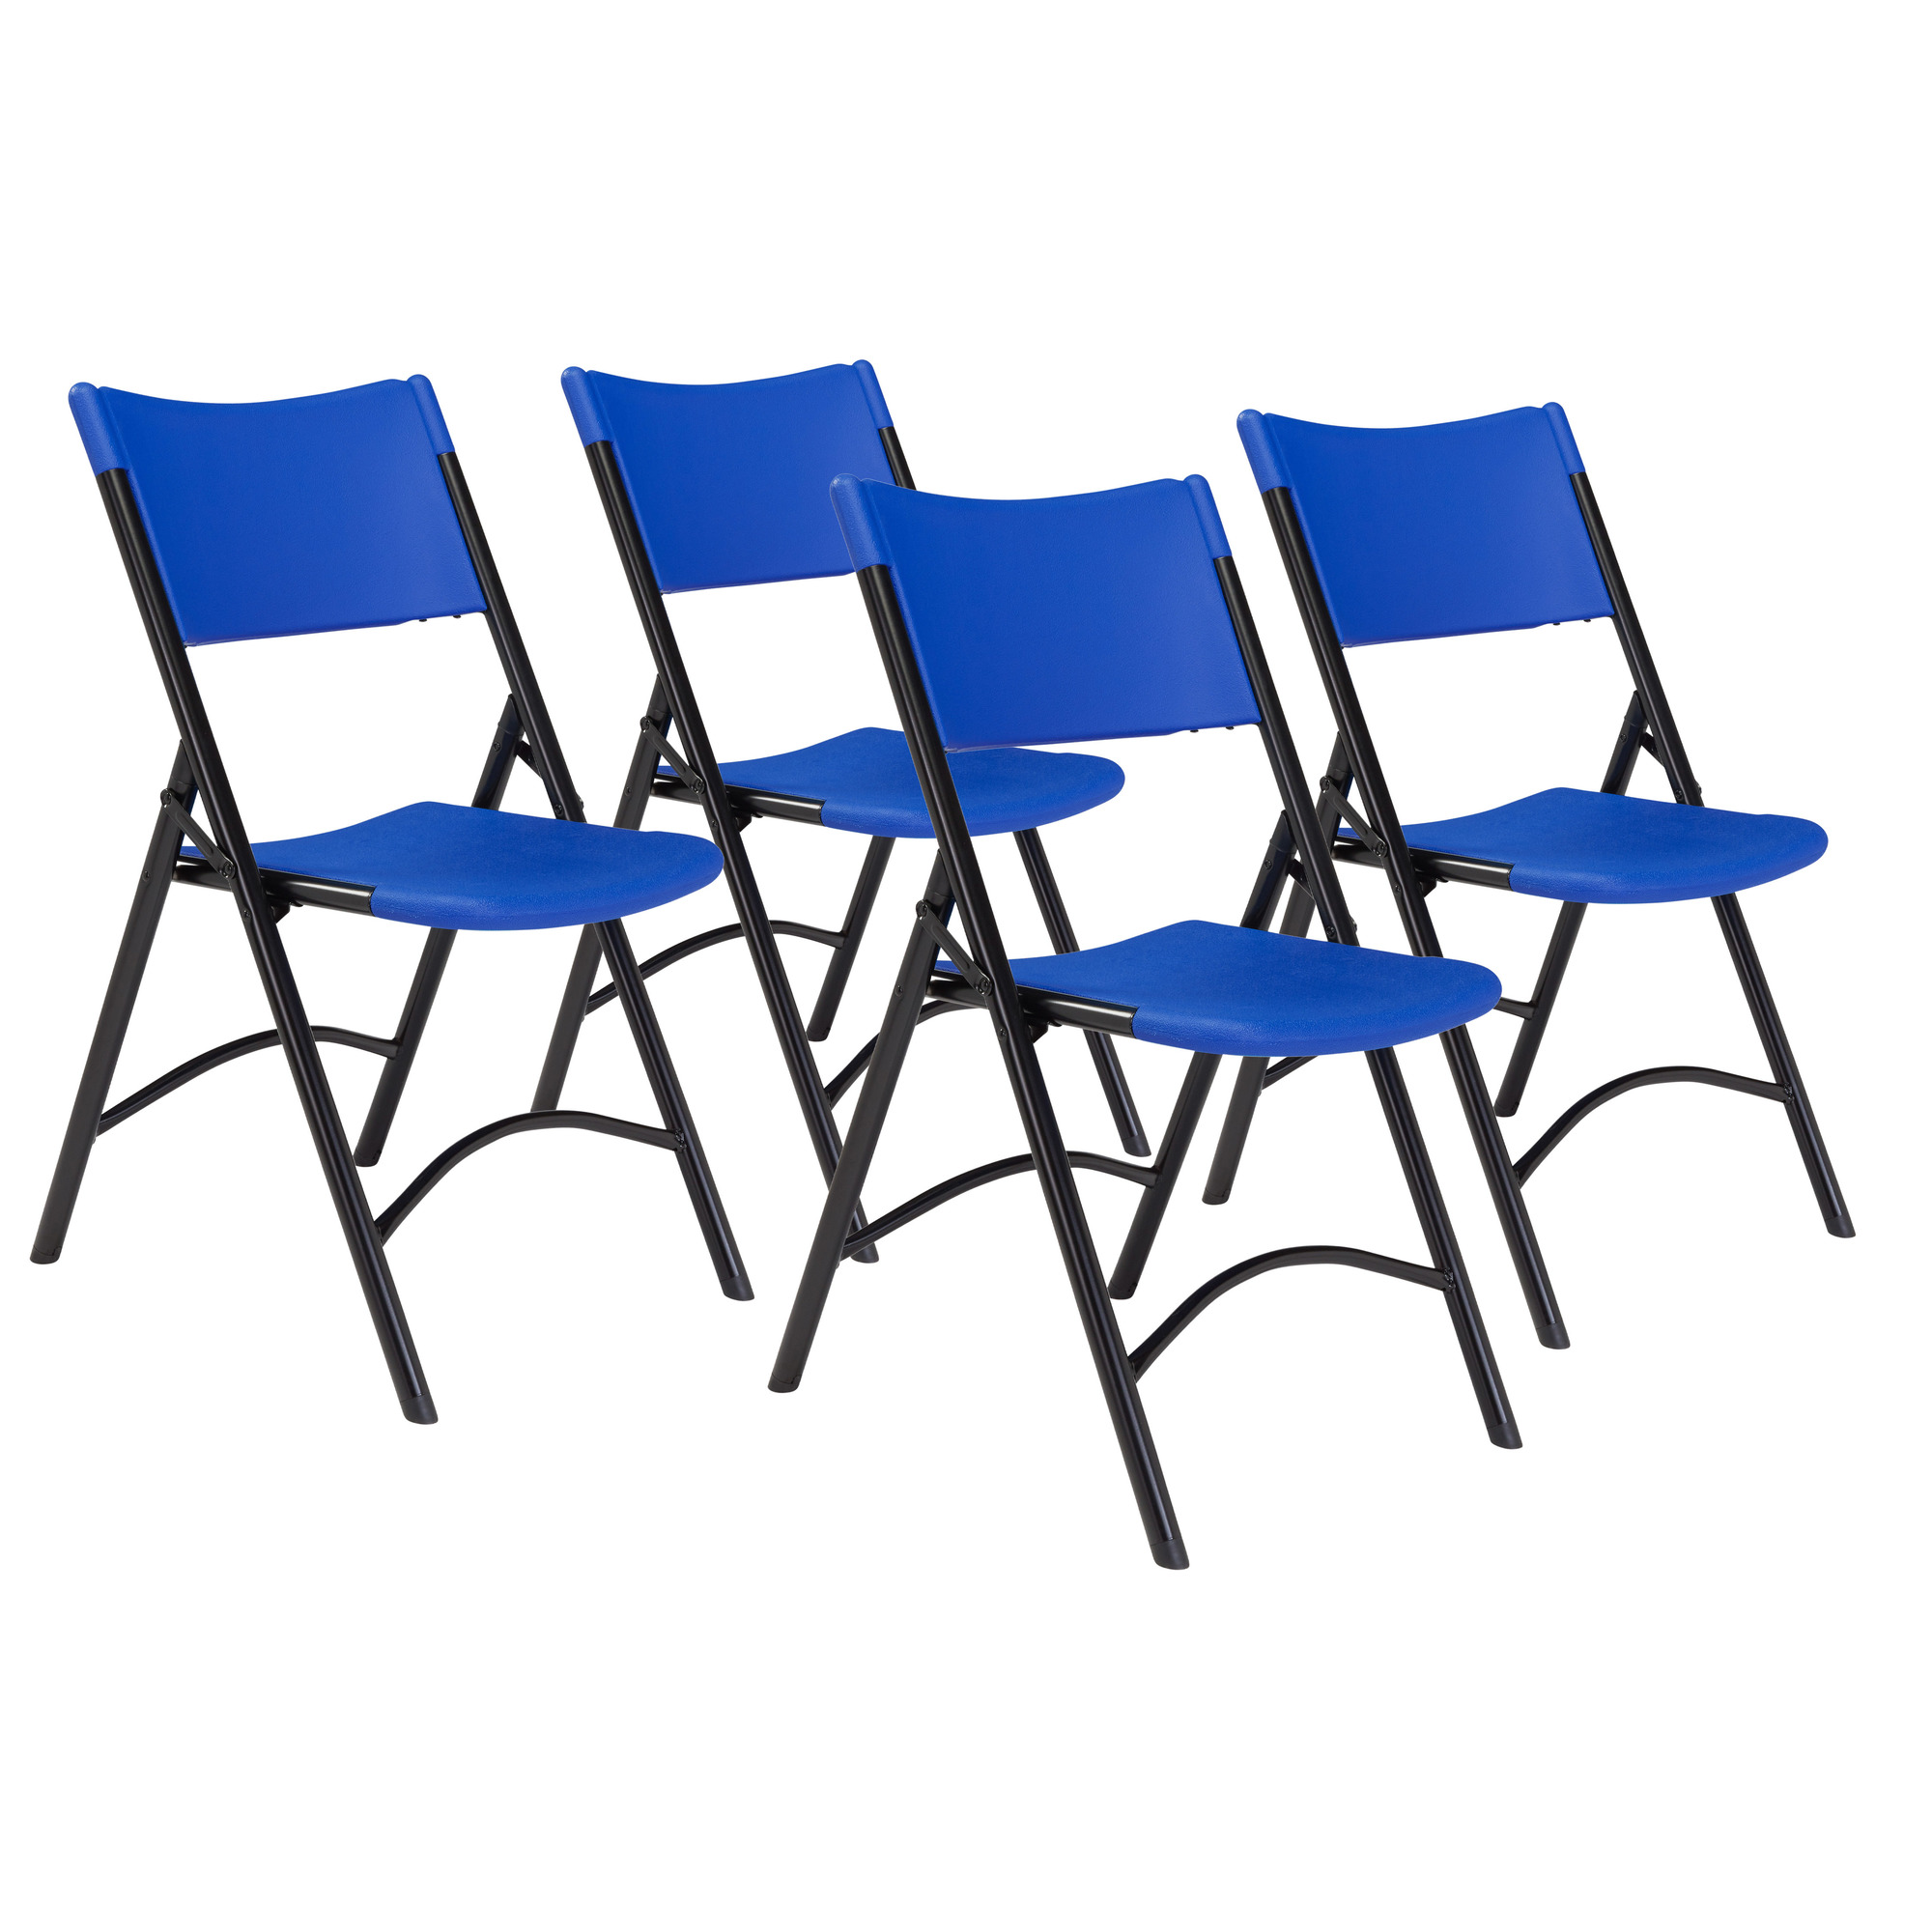 600 Series Heavy Duty Plastic Folding Chair, Primary Color Blue, Included (qty.) 4, Seating Type Folding Chair, Model - National Public Seating 604